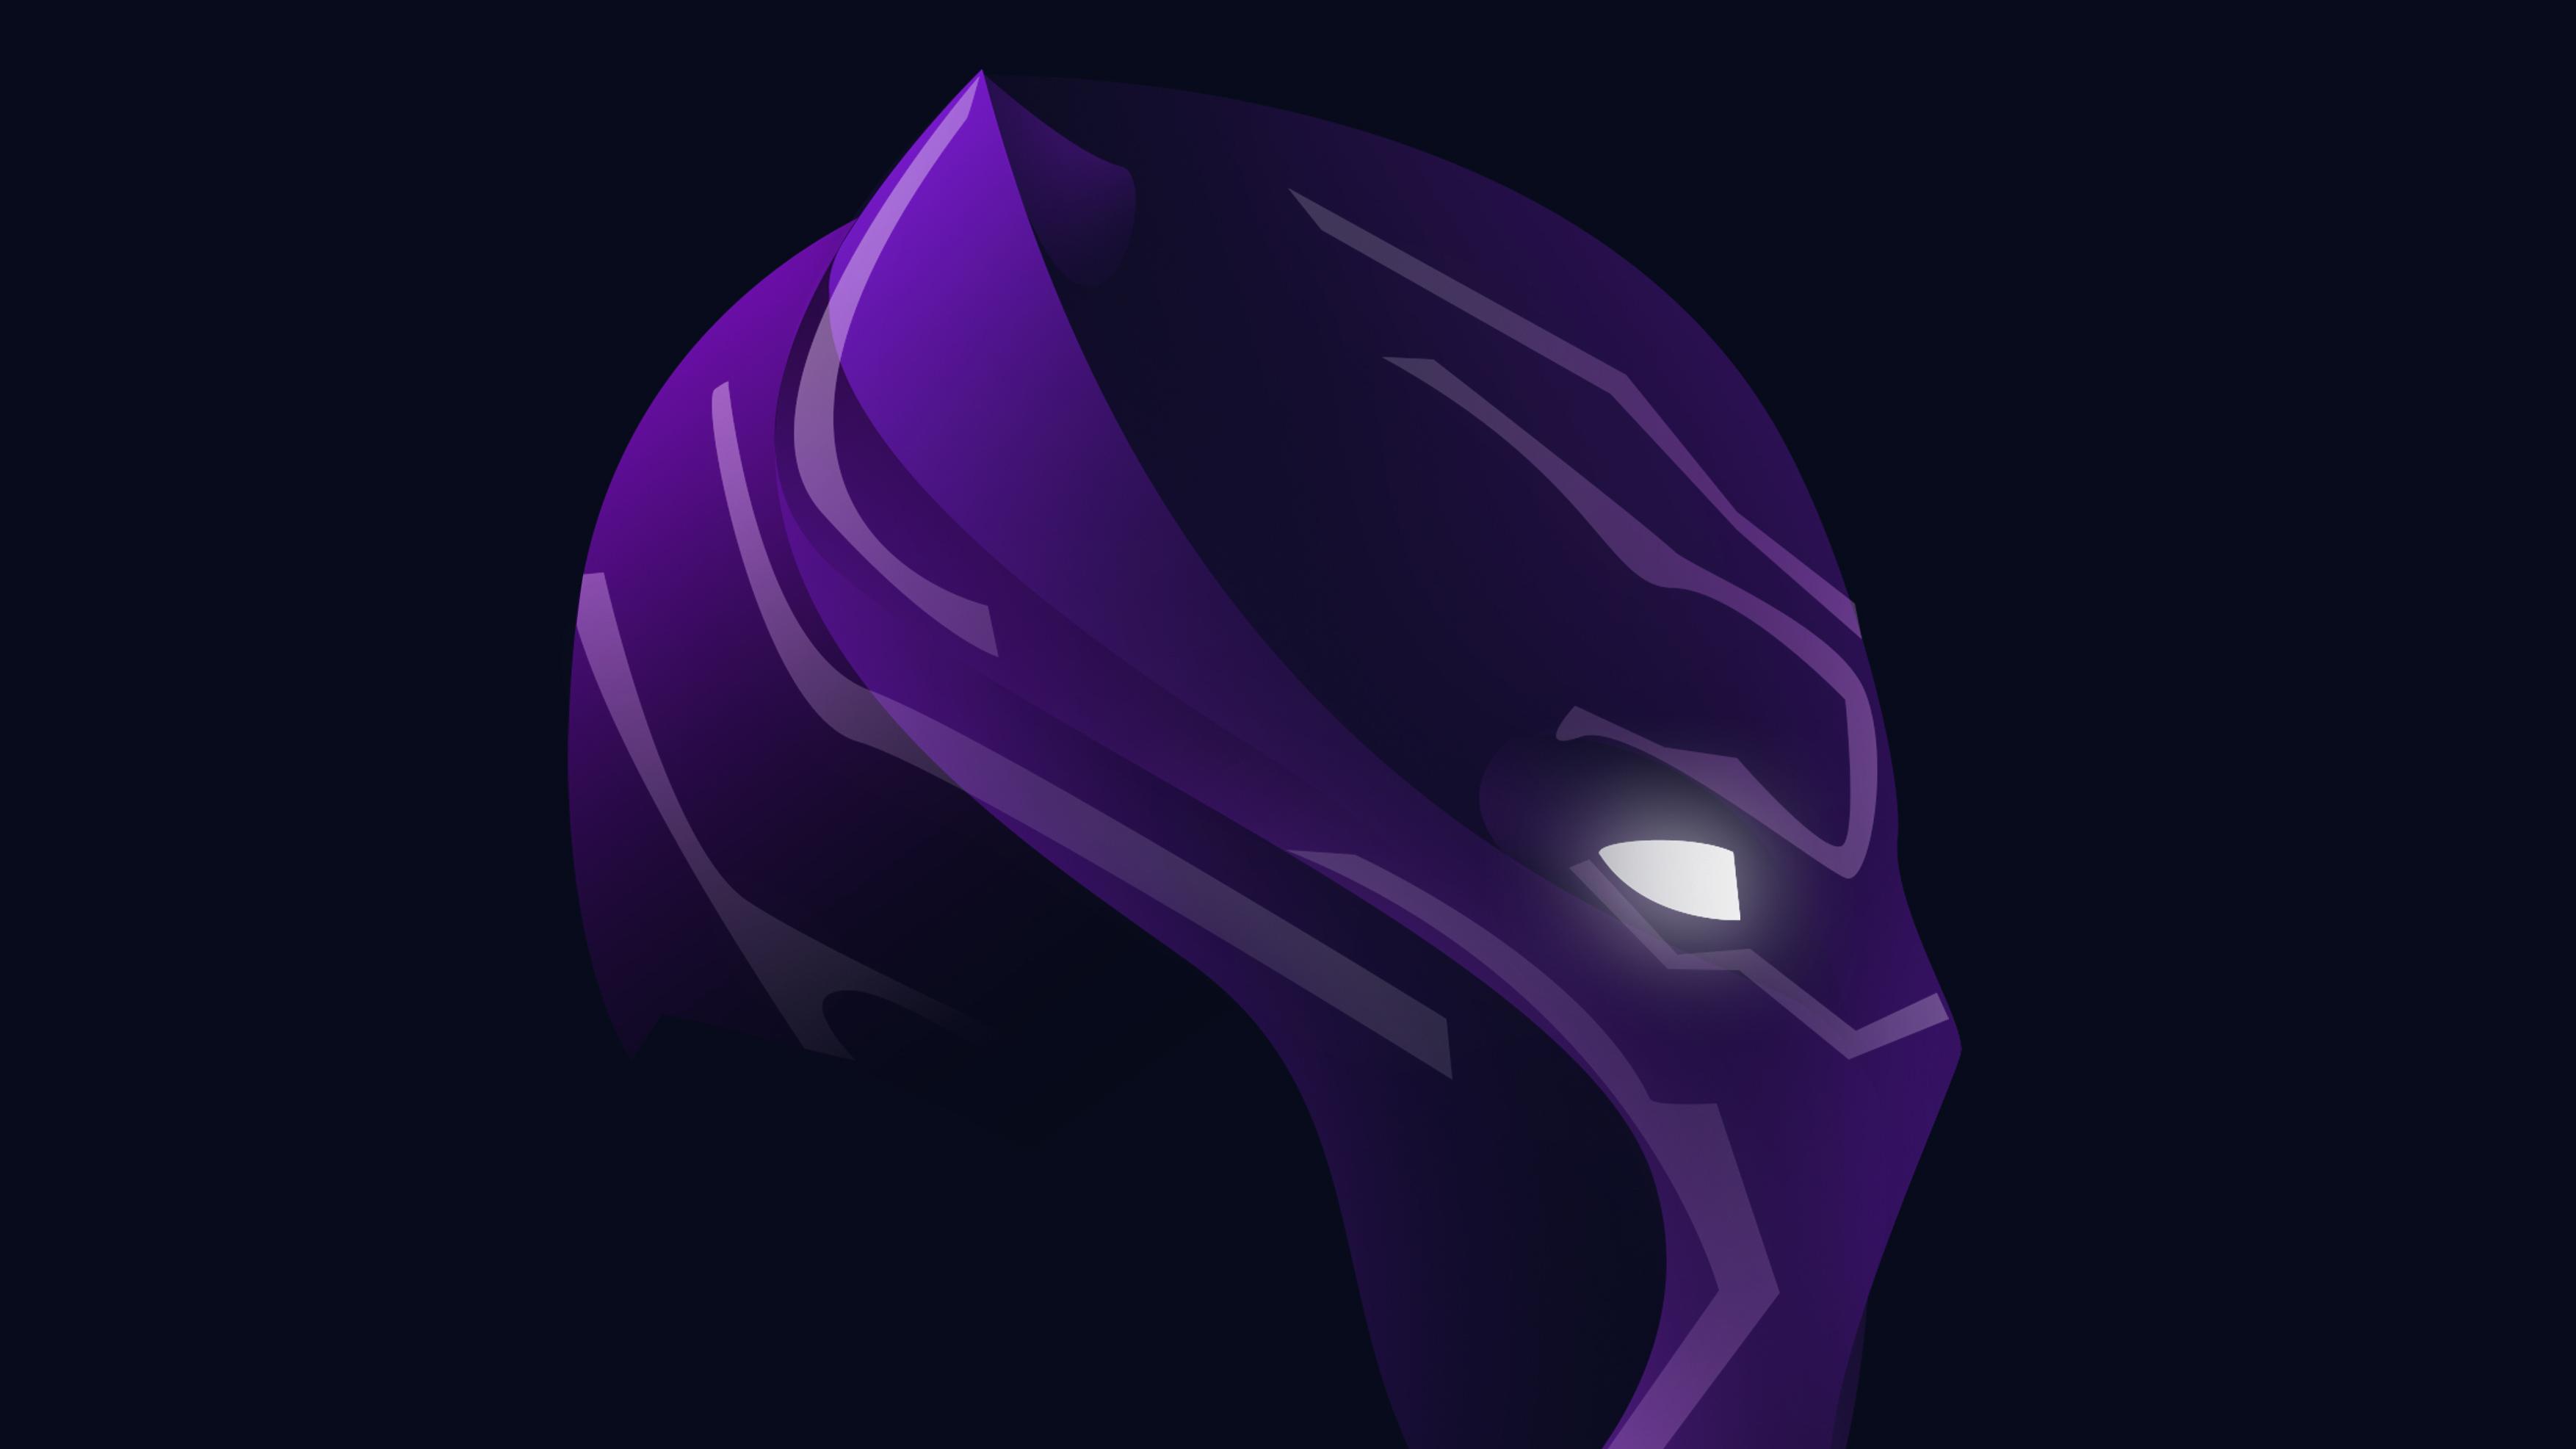 Black Panther Neon Wallpapers Wallpaper Cave